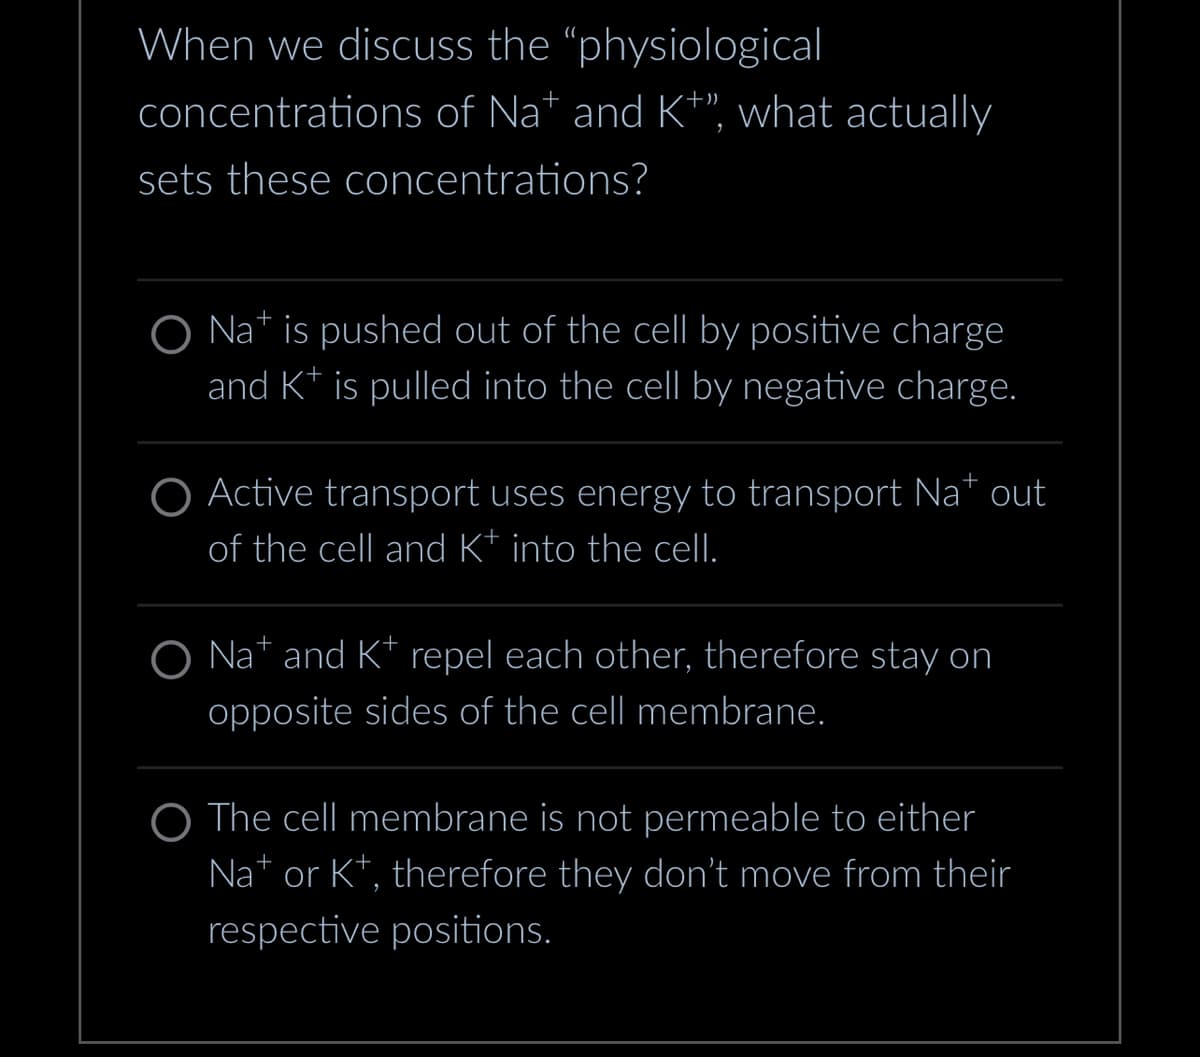 When we discuss the "physiological
concentrations of Na* and K+”, what actually
sets these concentrations?
O Nat is pushed out of the cell by positive charge
and K+ is pulled into the cell by negative charge.
+
O Active transport uses energy to transport Na* out
of the cell and K* into the cell.
O Na+ and K+ repel each other, therefore stay on
opposite sides of the cell membrane.
O The cell membrane is not permeable to either
Na+ or K+, therefore they don't move from their
respective positions.